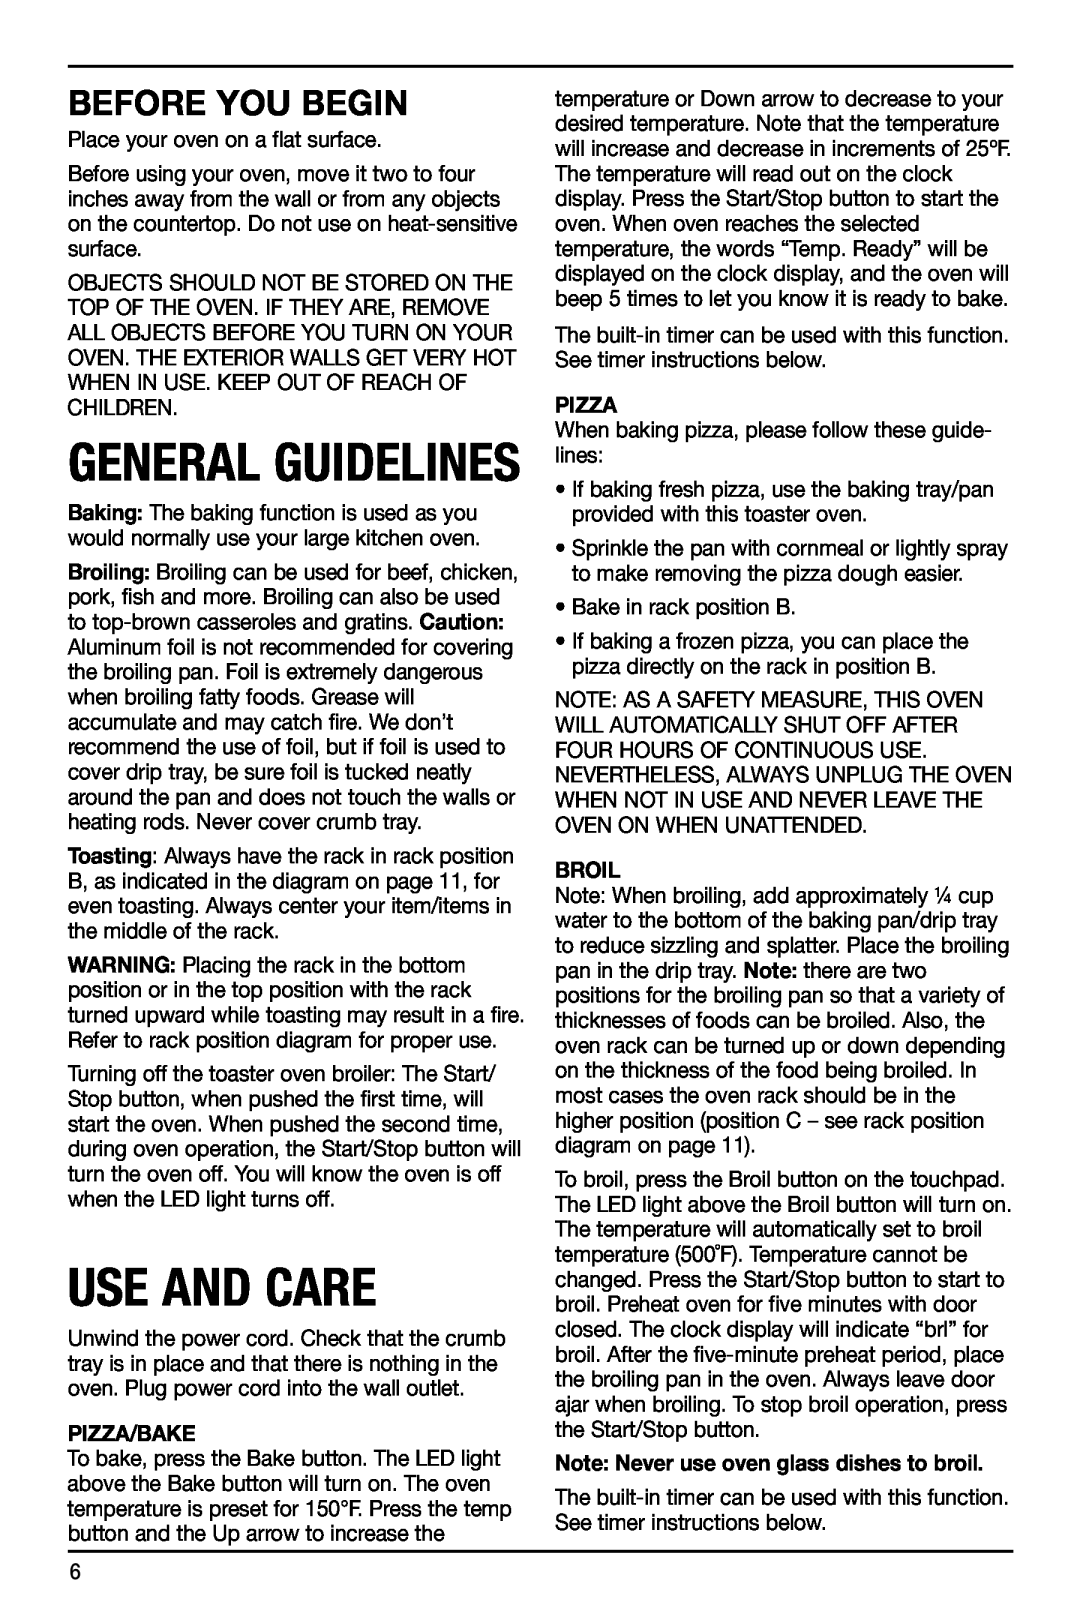 Cuisinart TOB-155 manual Before you begin, Use And Care, General Guidelines 